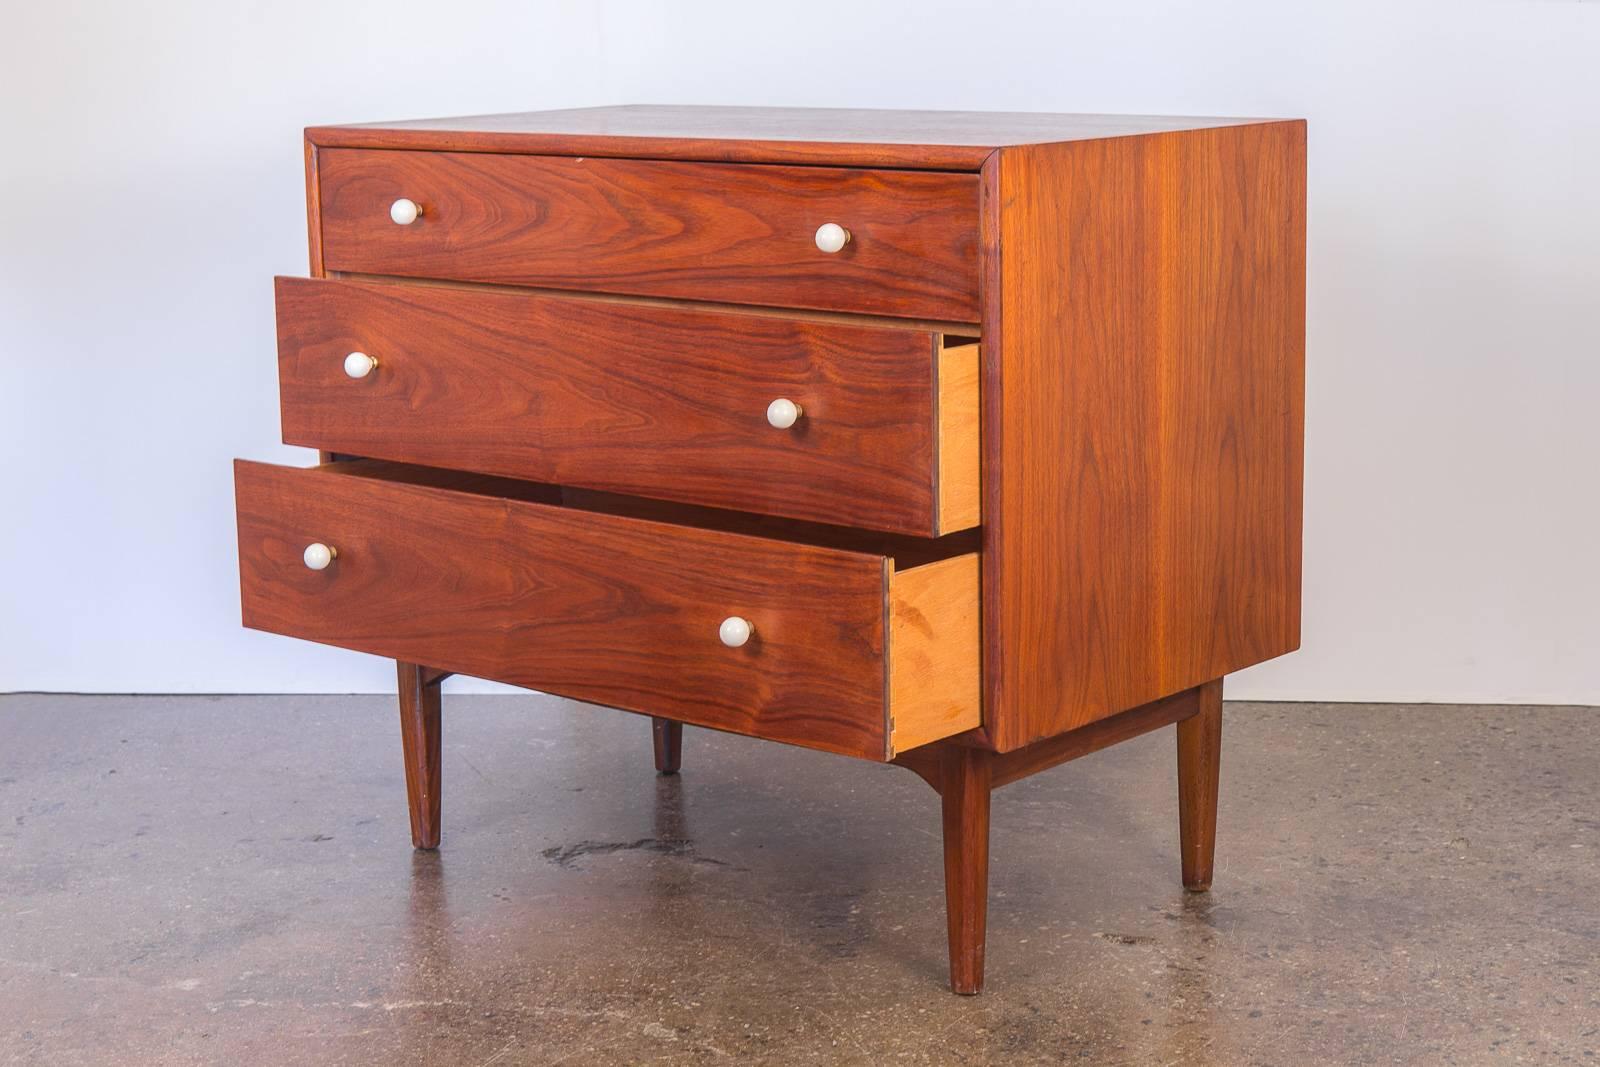 Declaration vanity dresser by Kipp Stewart and Stewart MacDougall for Drexel. This clean walnut dresser has been polished and oiled, and is in excellent vintage condition. Pretty walnut grain is attractive and gleaming. Surface is very clean with no